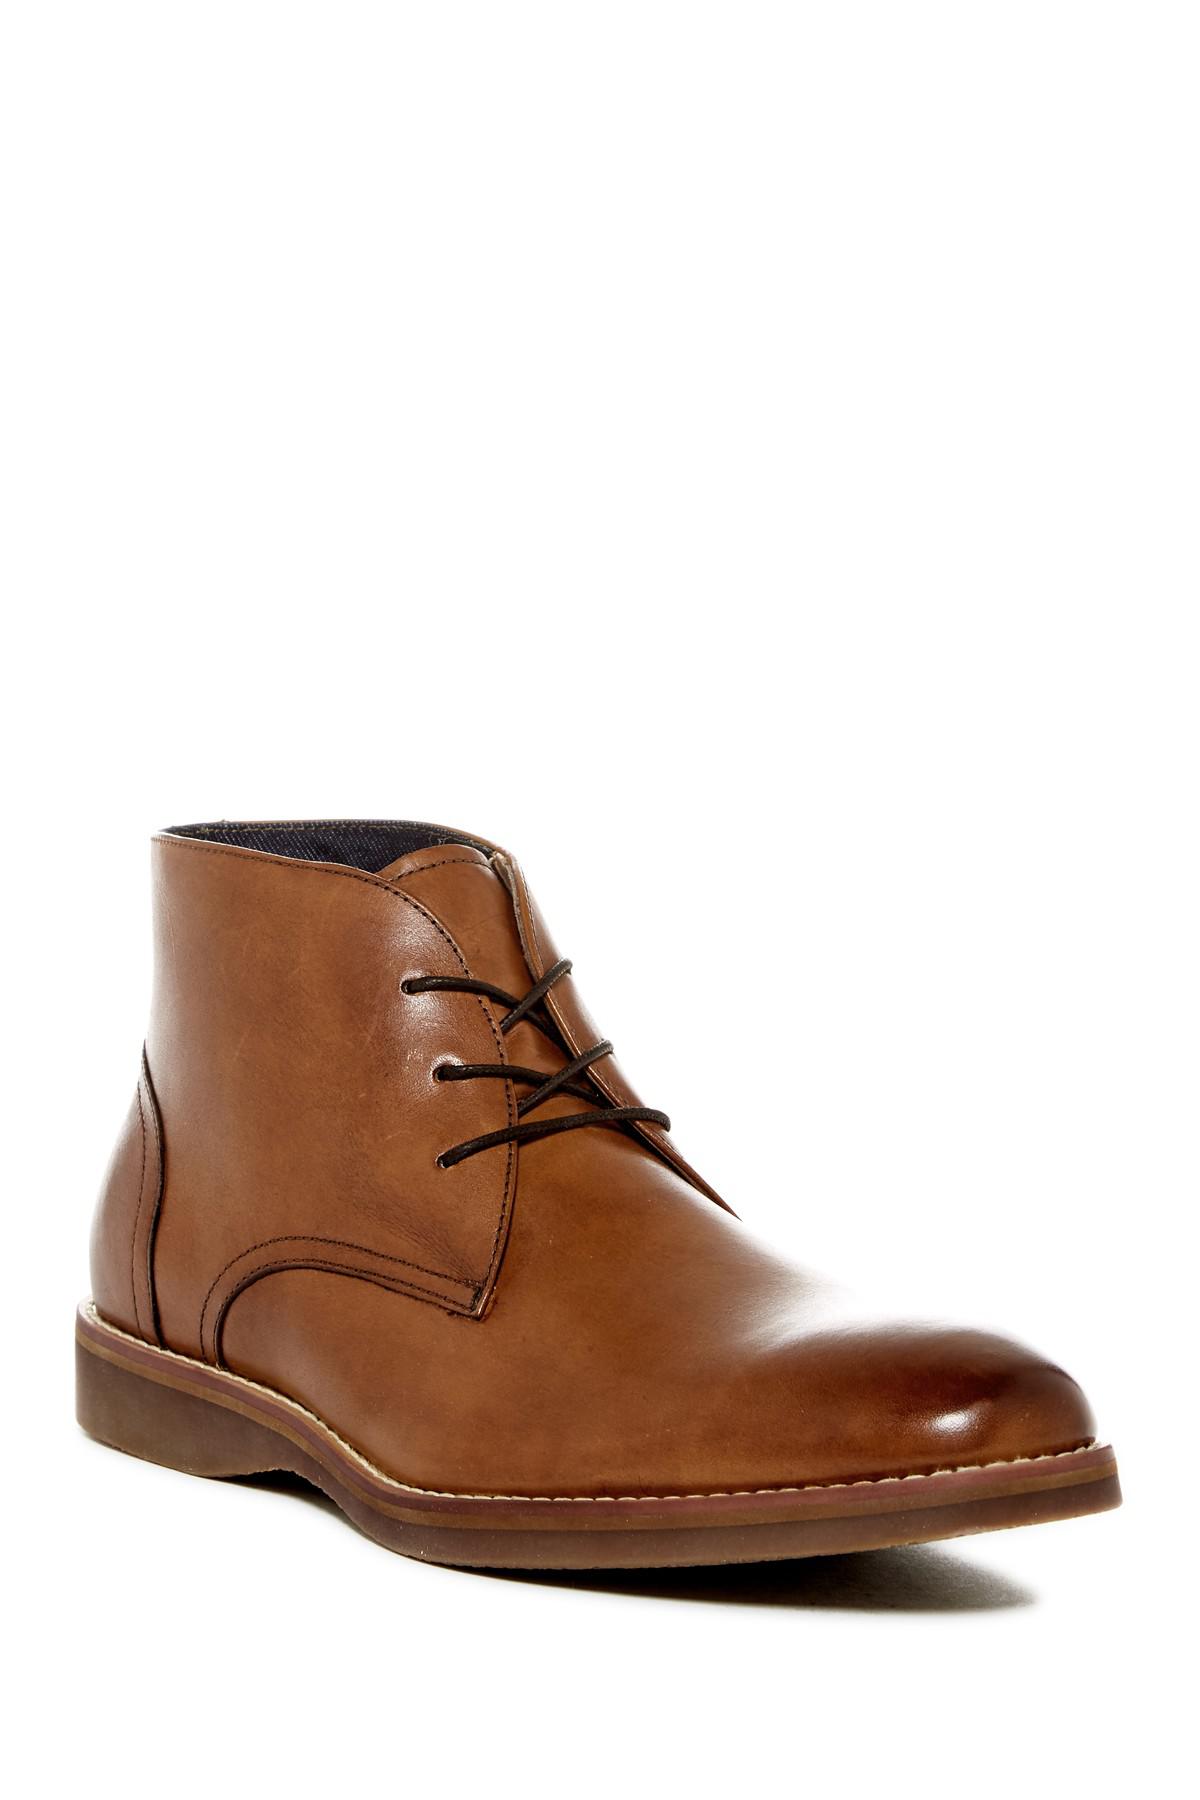 Lyst - Aldo Waylle Leather Chukka Boot in Brown for Men